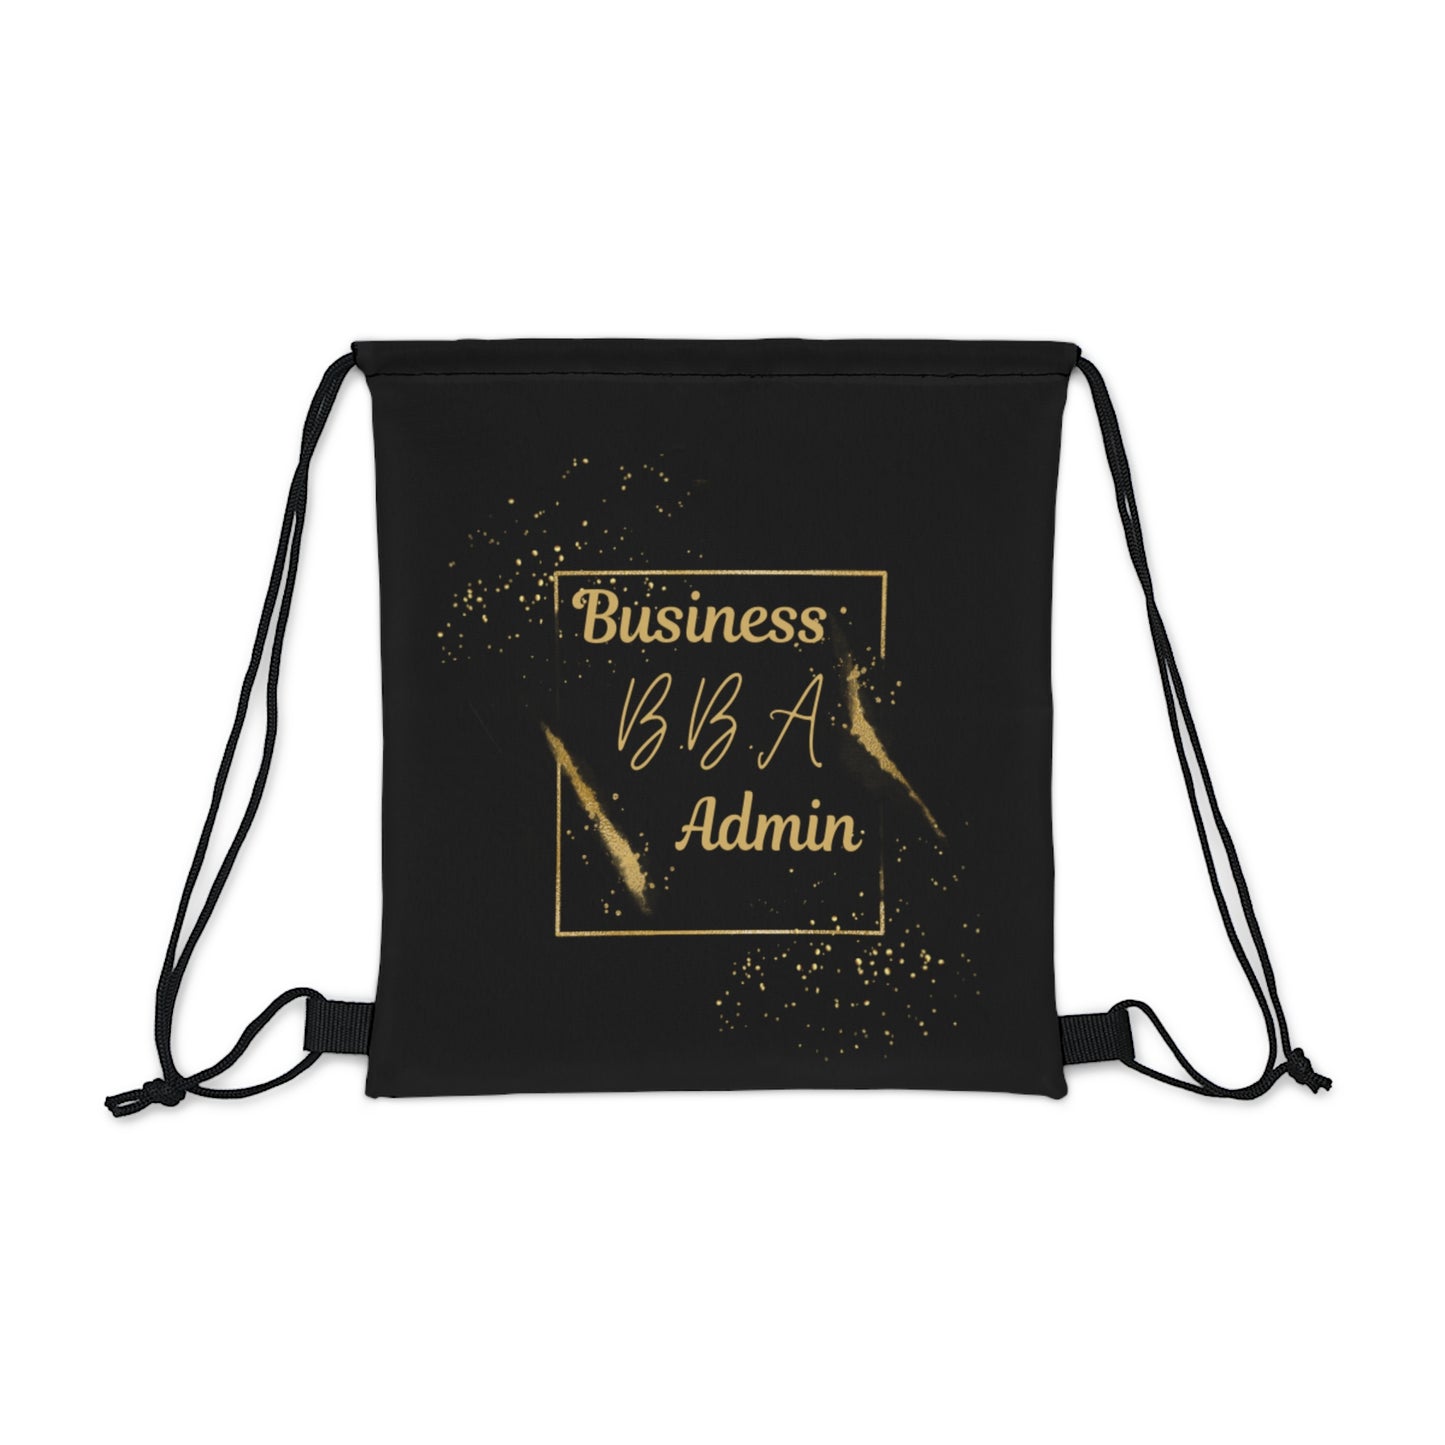 B.B.A- Drawstring Bag with Bachelor of Business Administration Credentials